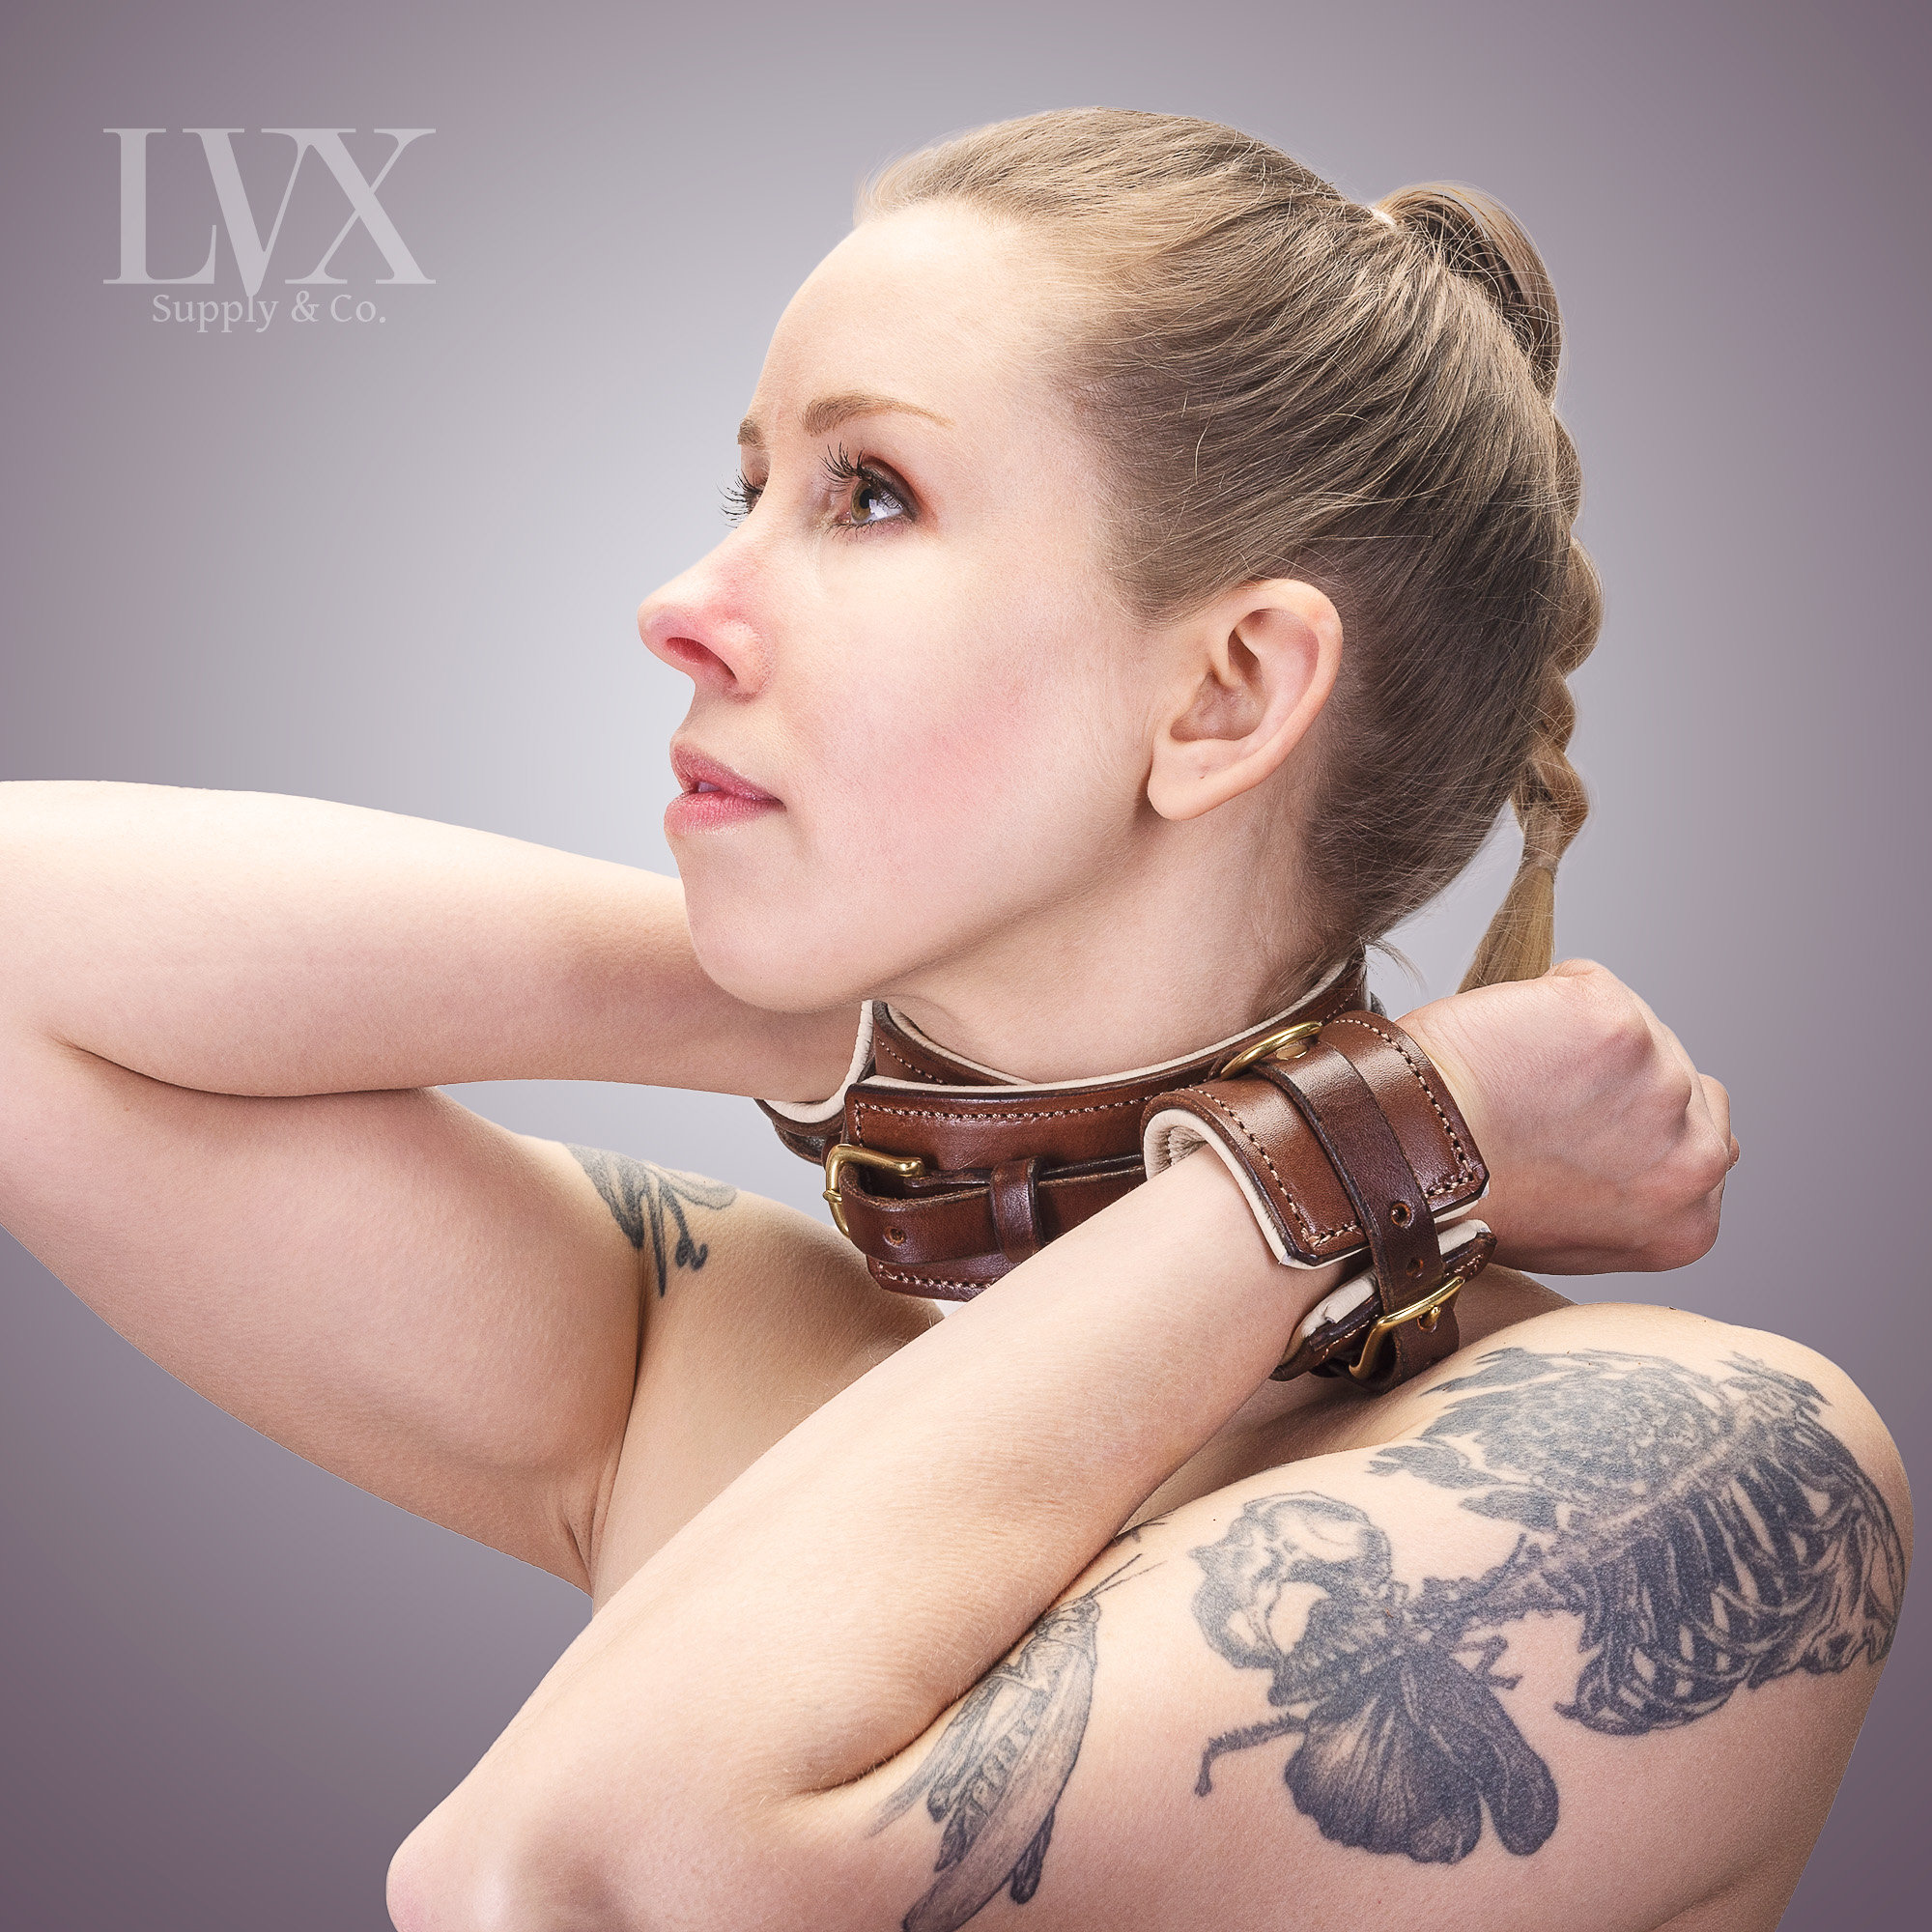 Padded Leather Stocks | Leather BDSM Collar w/ Attached Cuffs | Leather Bondage Harness Set Submissive Slave Toys bdsm-gear | LVX Supply photo